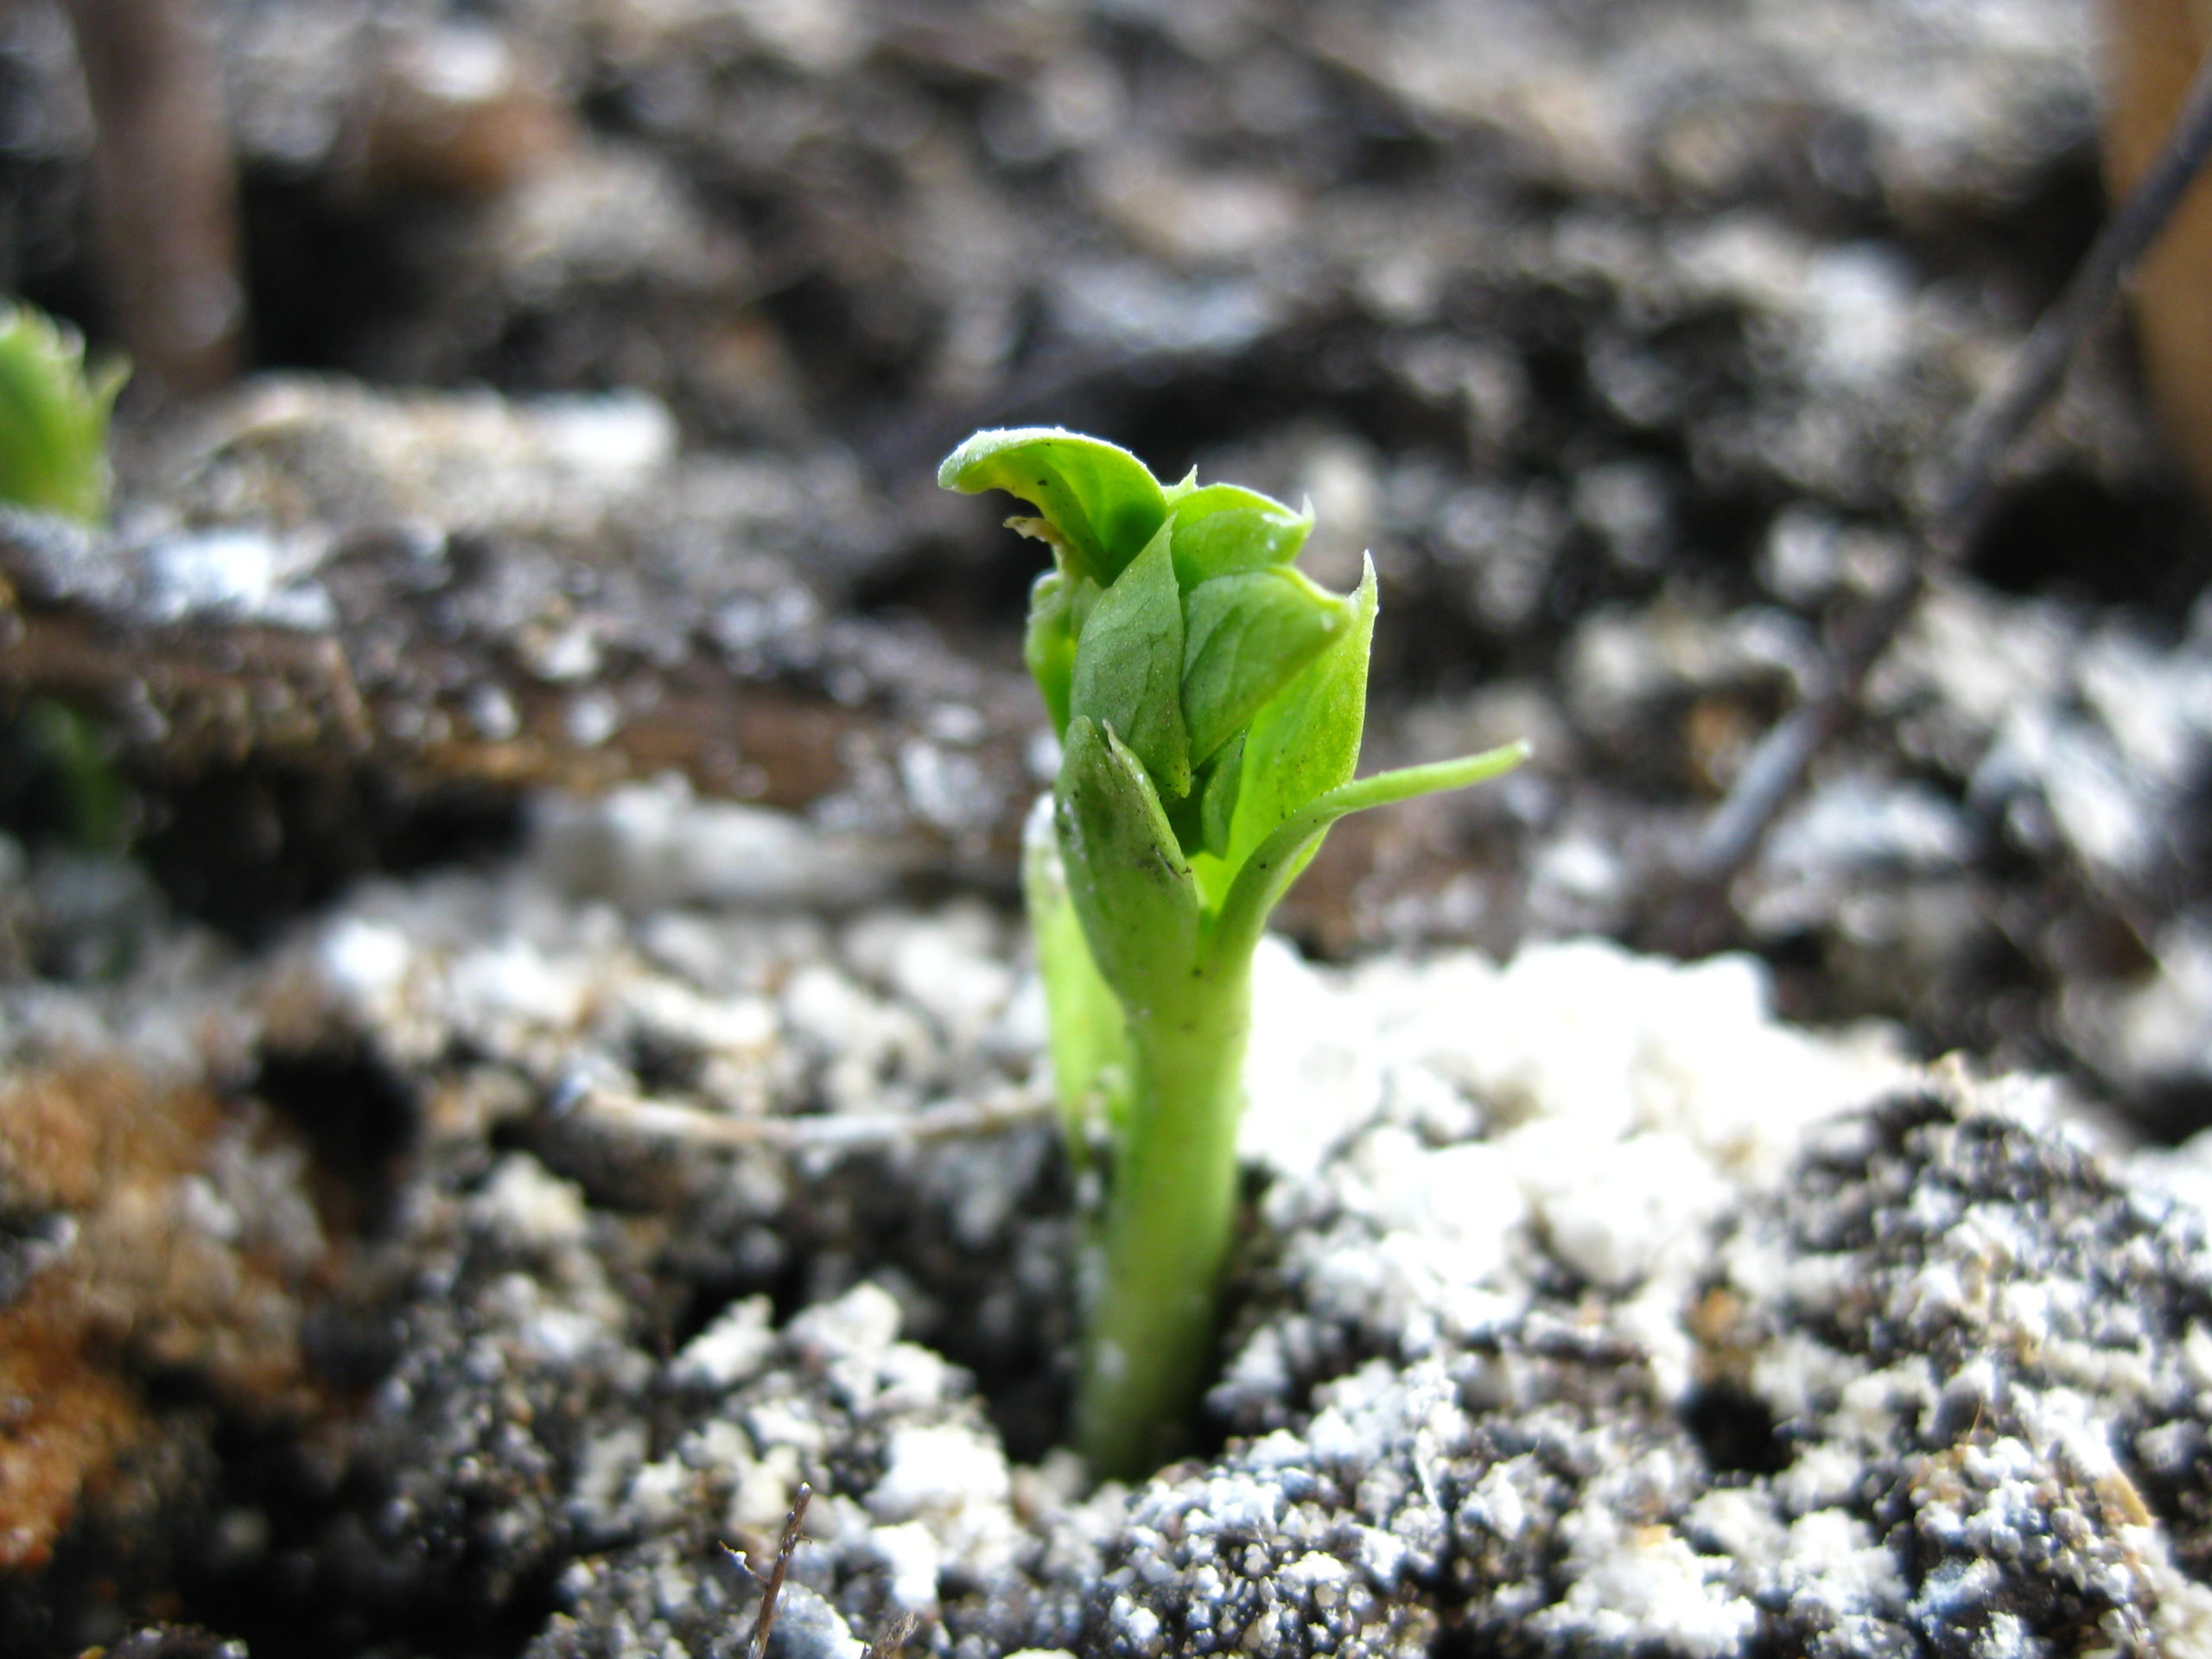 Seedling coming up in frosty soil.